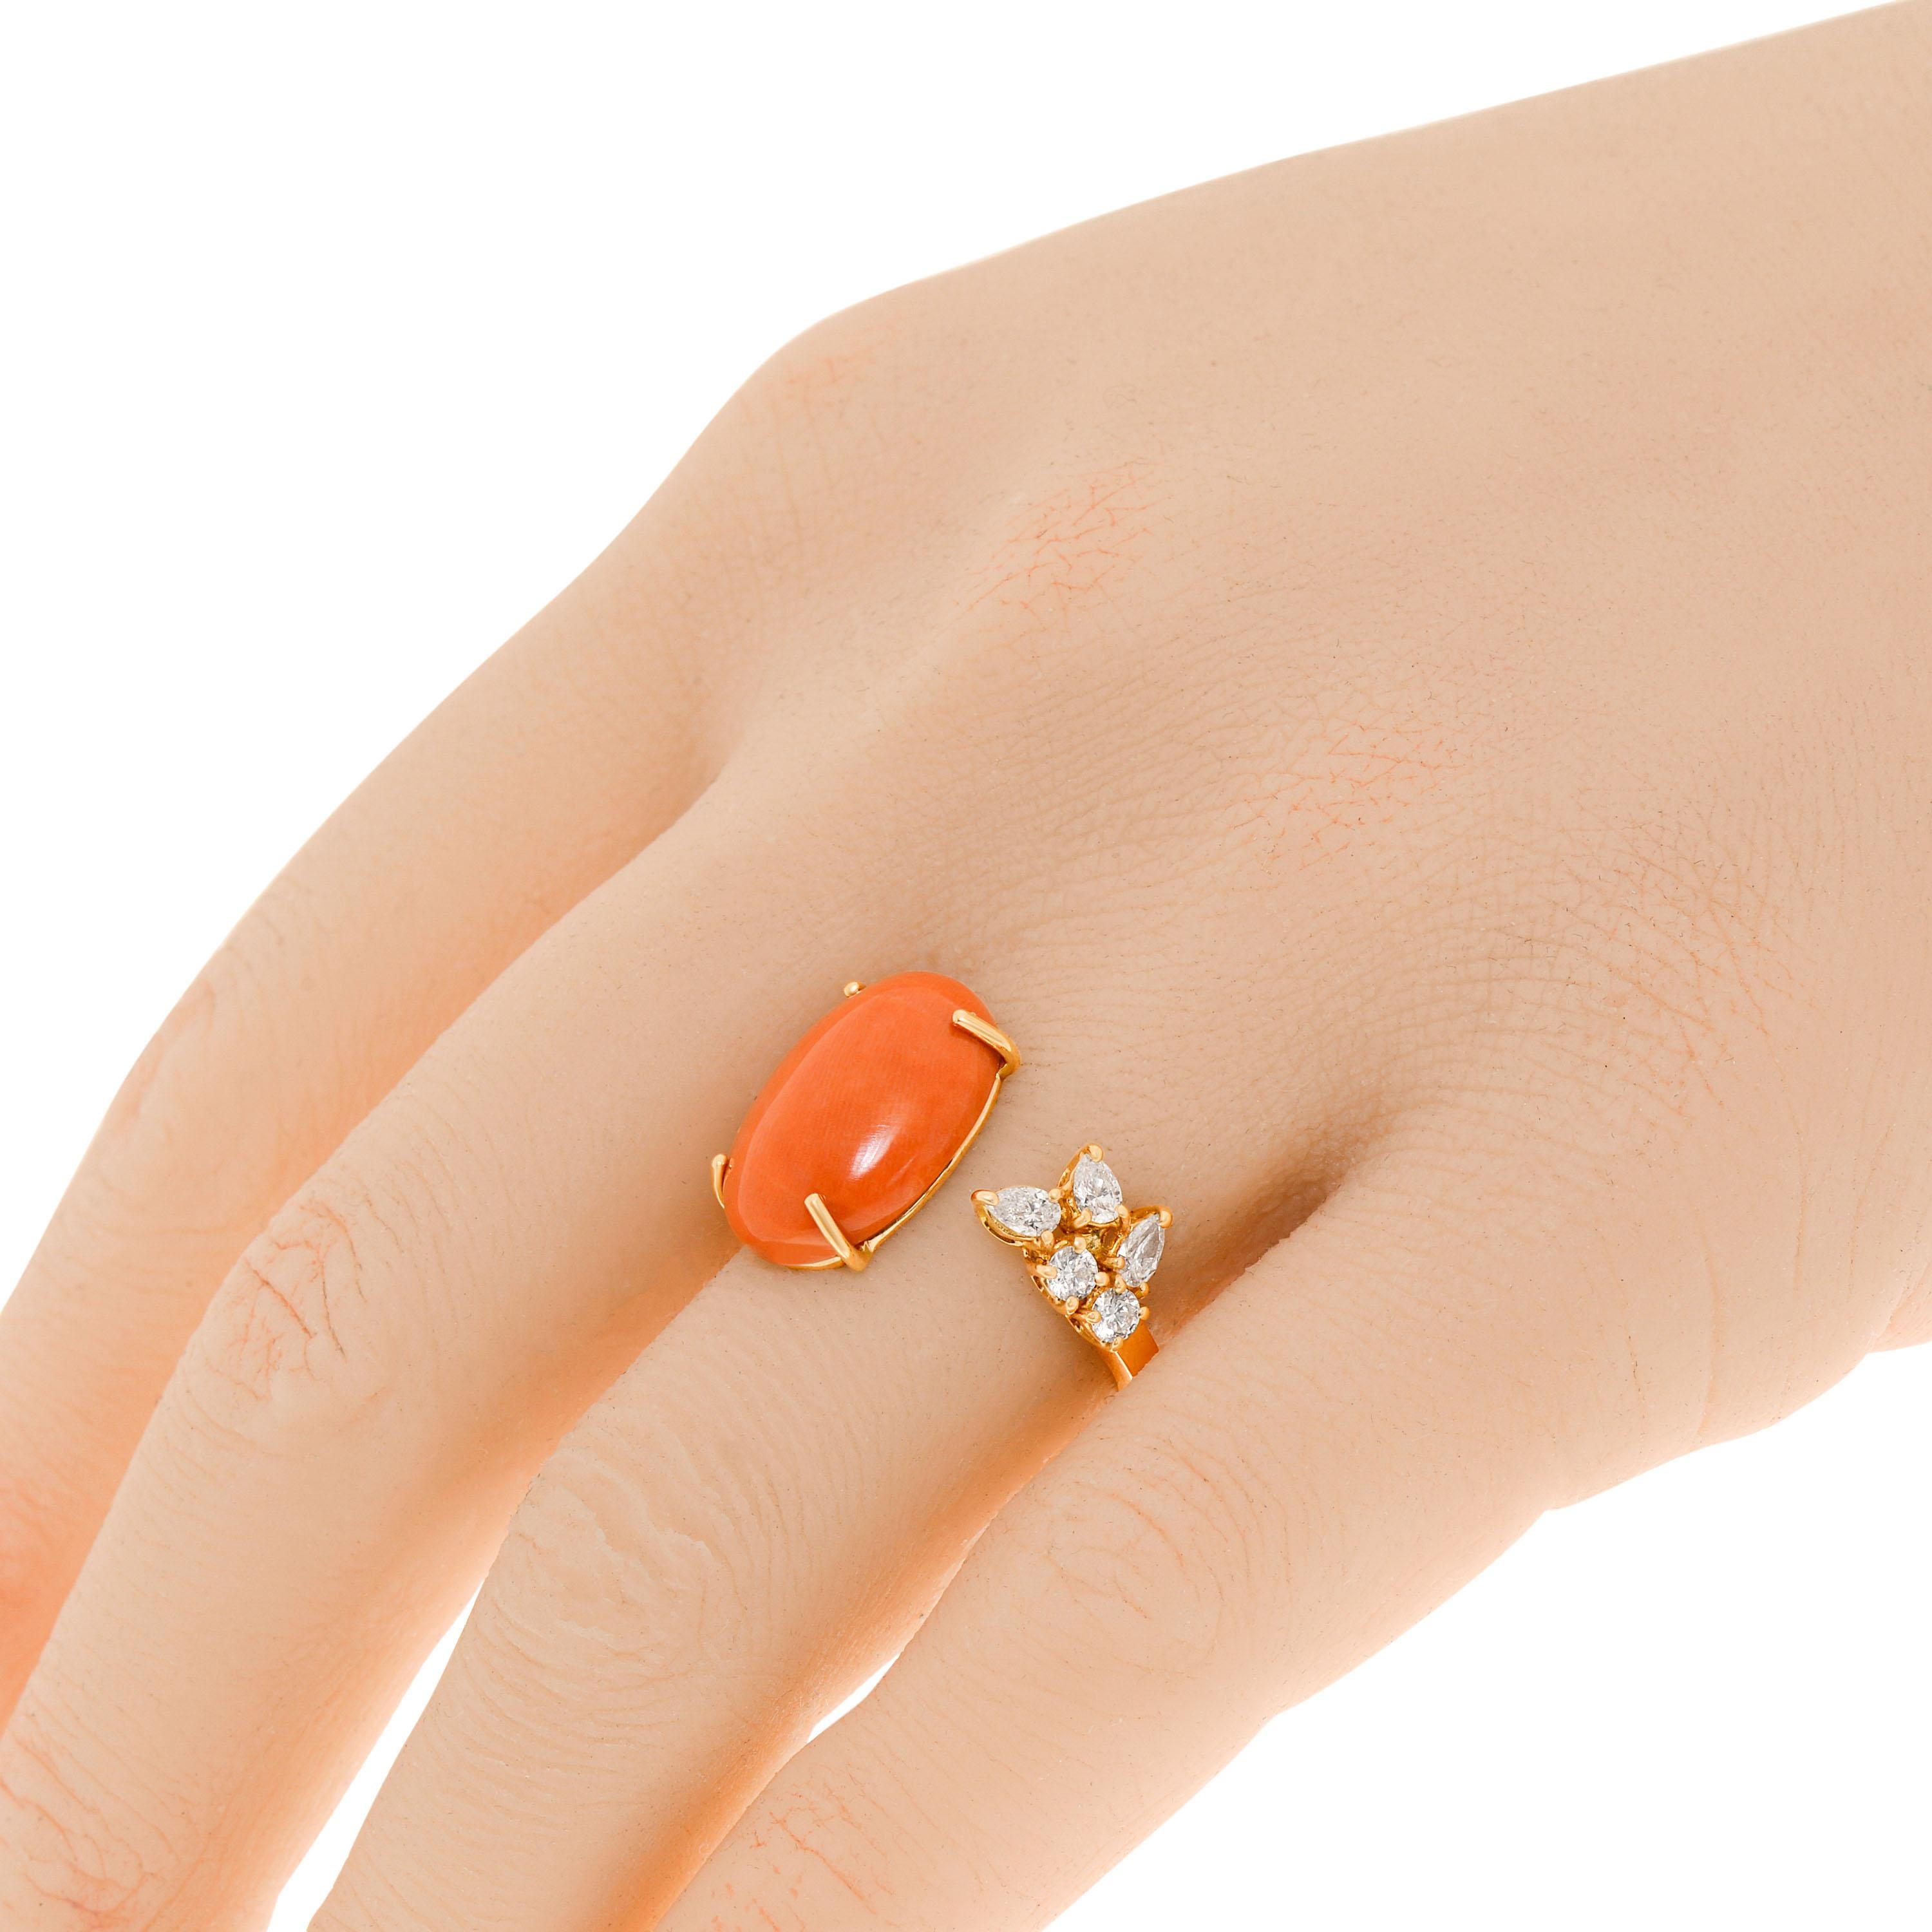 Zydo 18K Rose Gold Gemstone Ring features a Coral gemstone with 0.36ct. tw. clustered diamonds. The ring size is 6.5 (53.1). The decoration size is 5/8